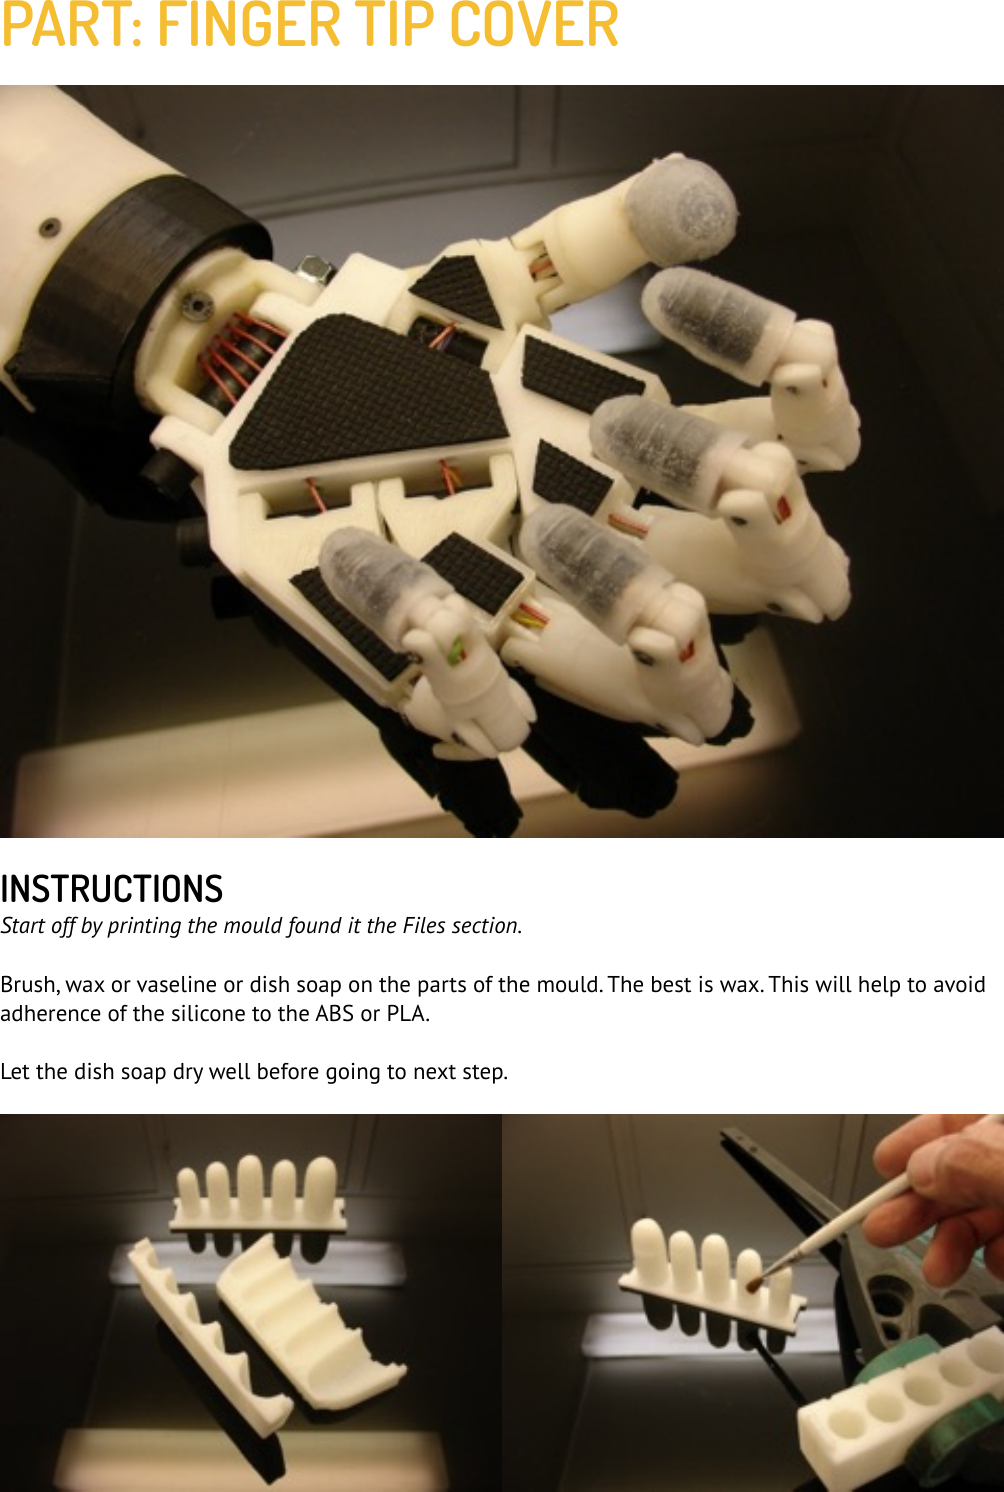 Page 1 of 5 - Finger Tip Cover Instructions